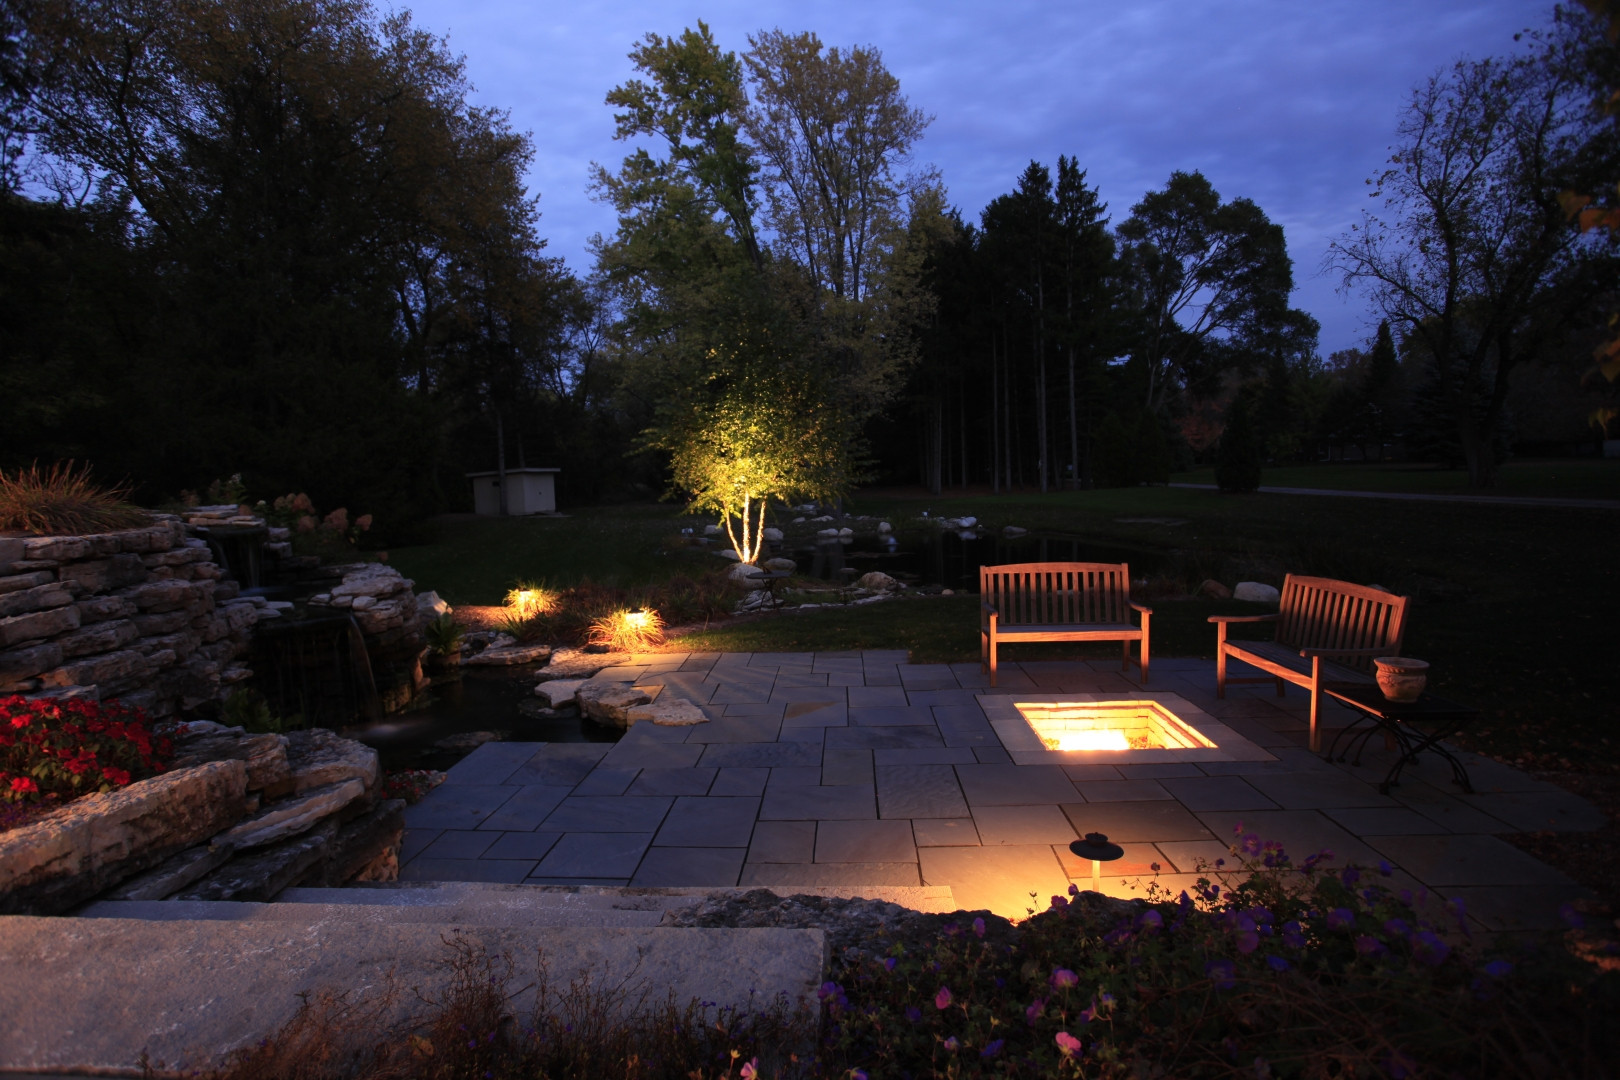 This landscape in Mequon, WI includes landscape lighting.